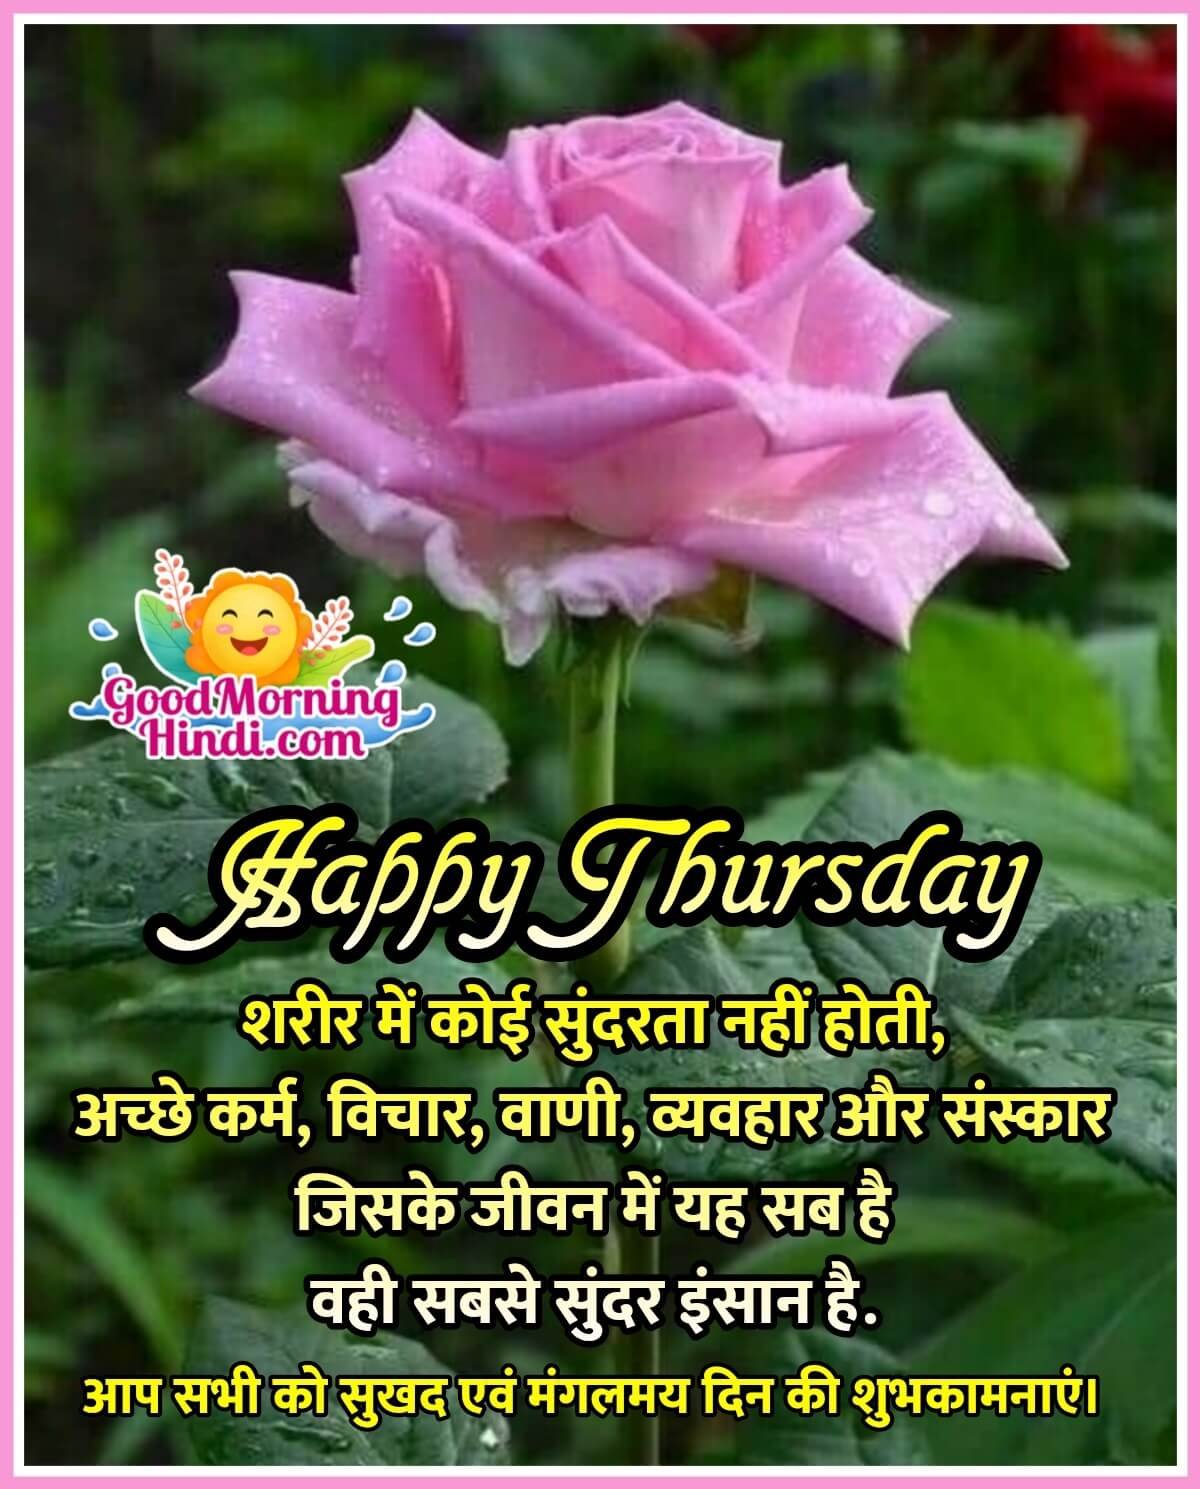 Happy Thursday Messages In Hindi - Good Morning Wishes & Images In ...